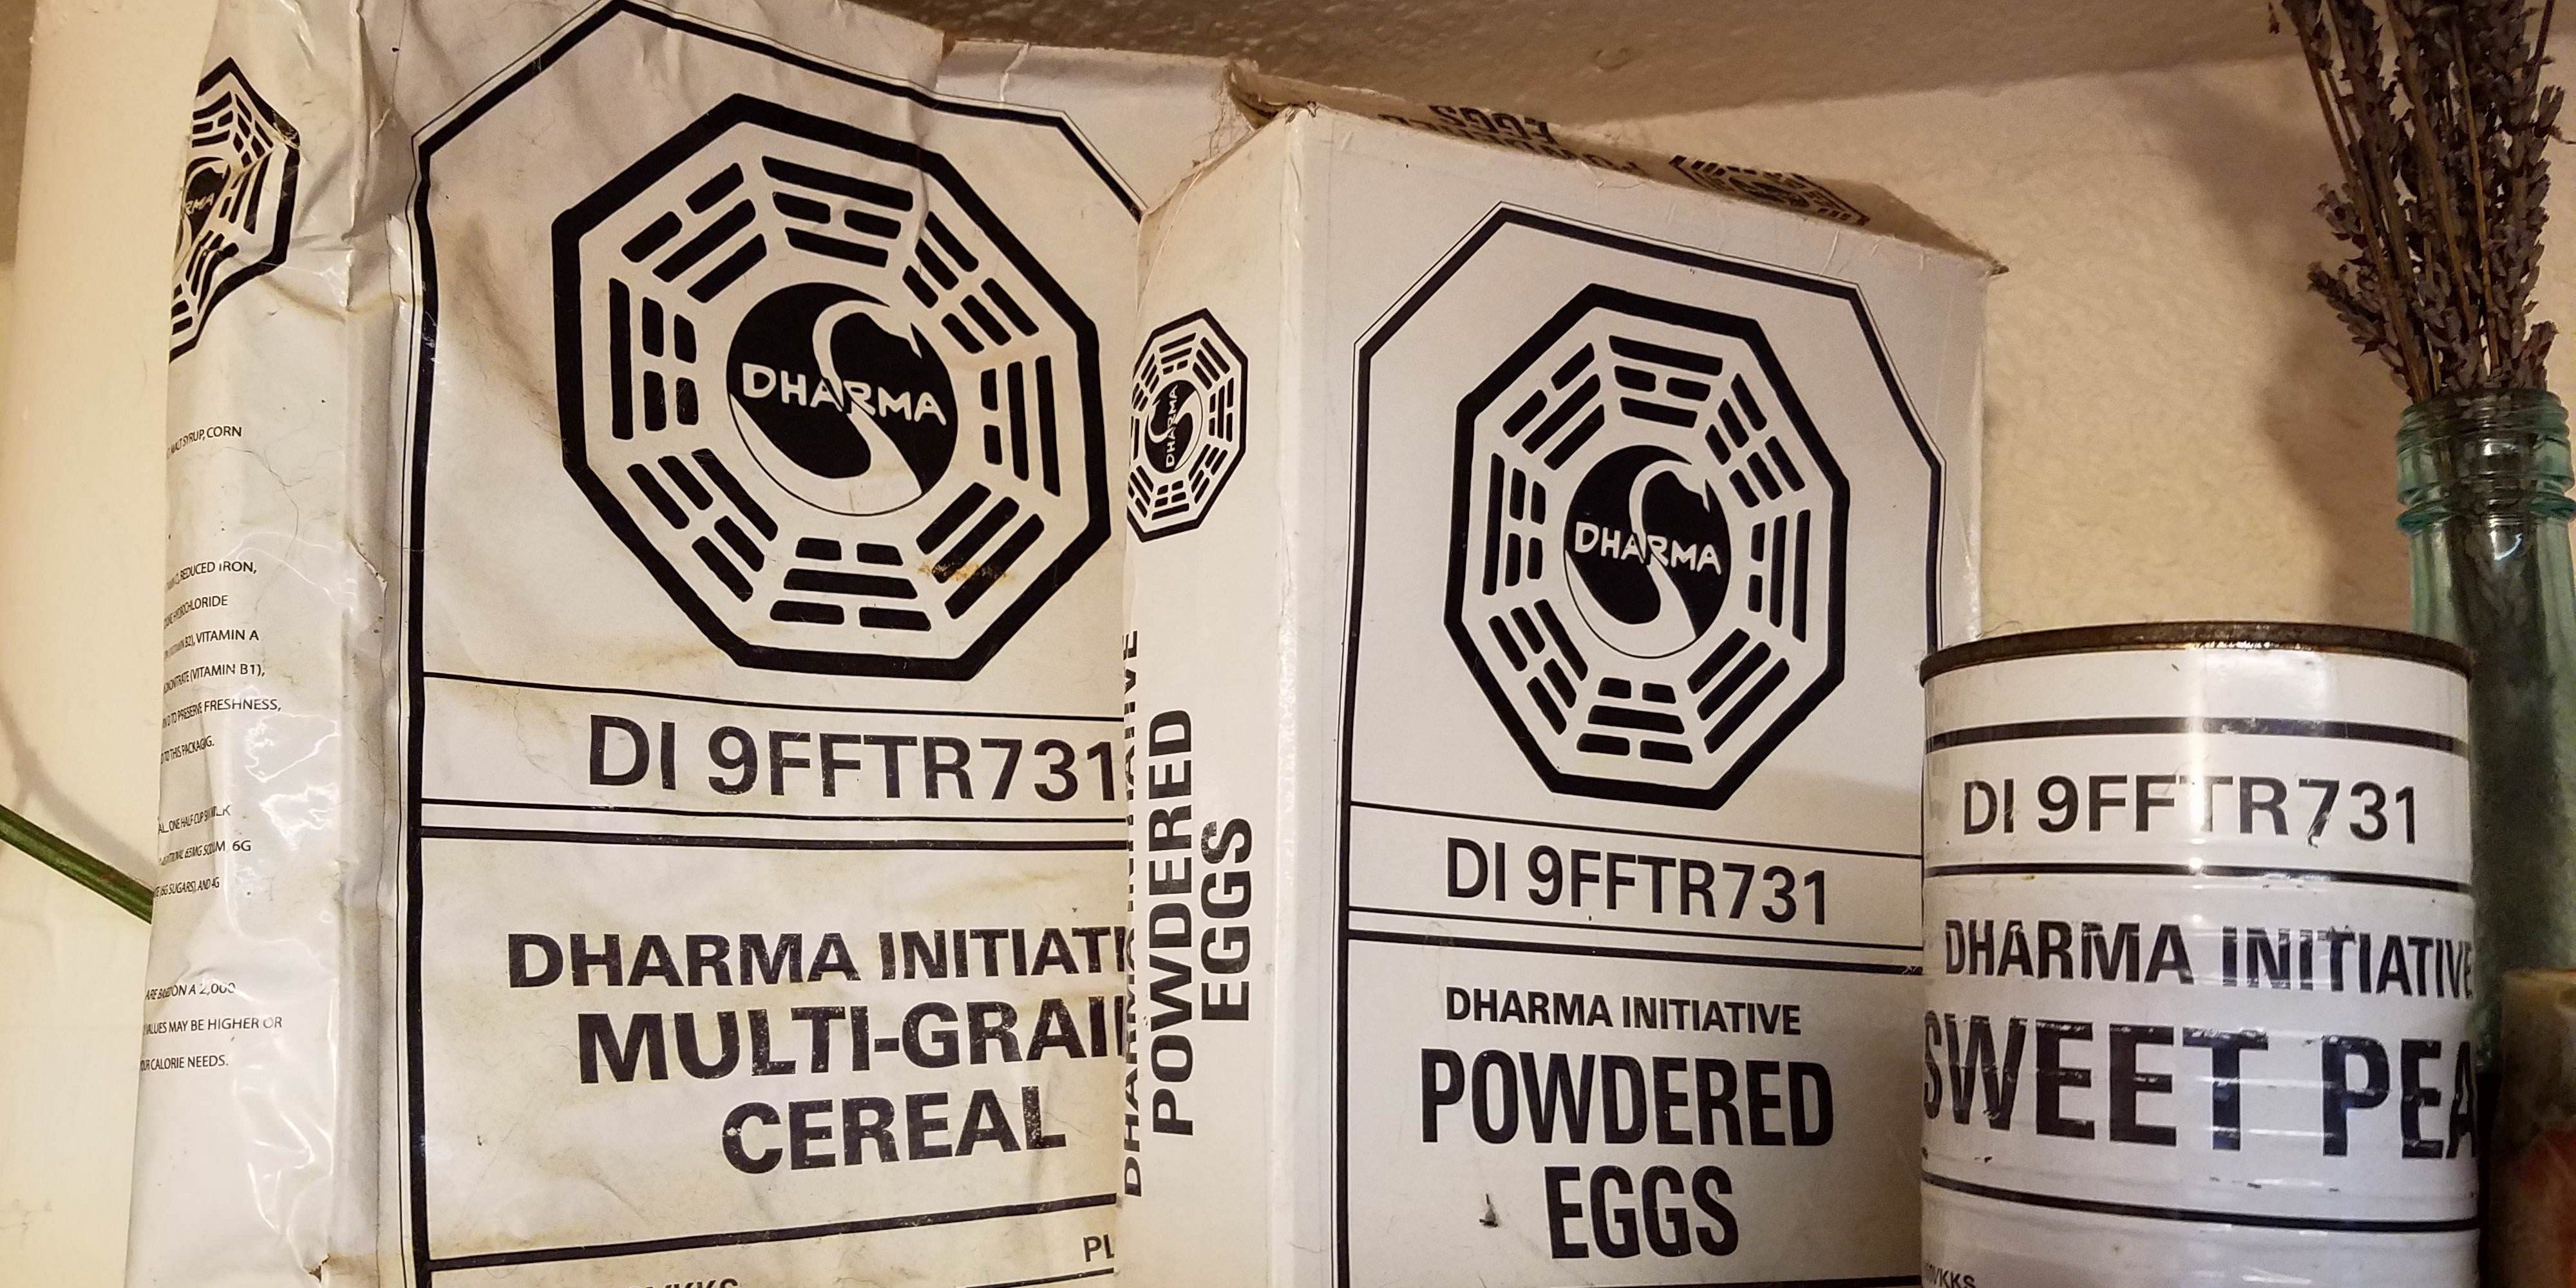 LOST 10 Unanswered Questions About The Dharma Initiative